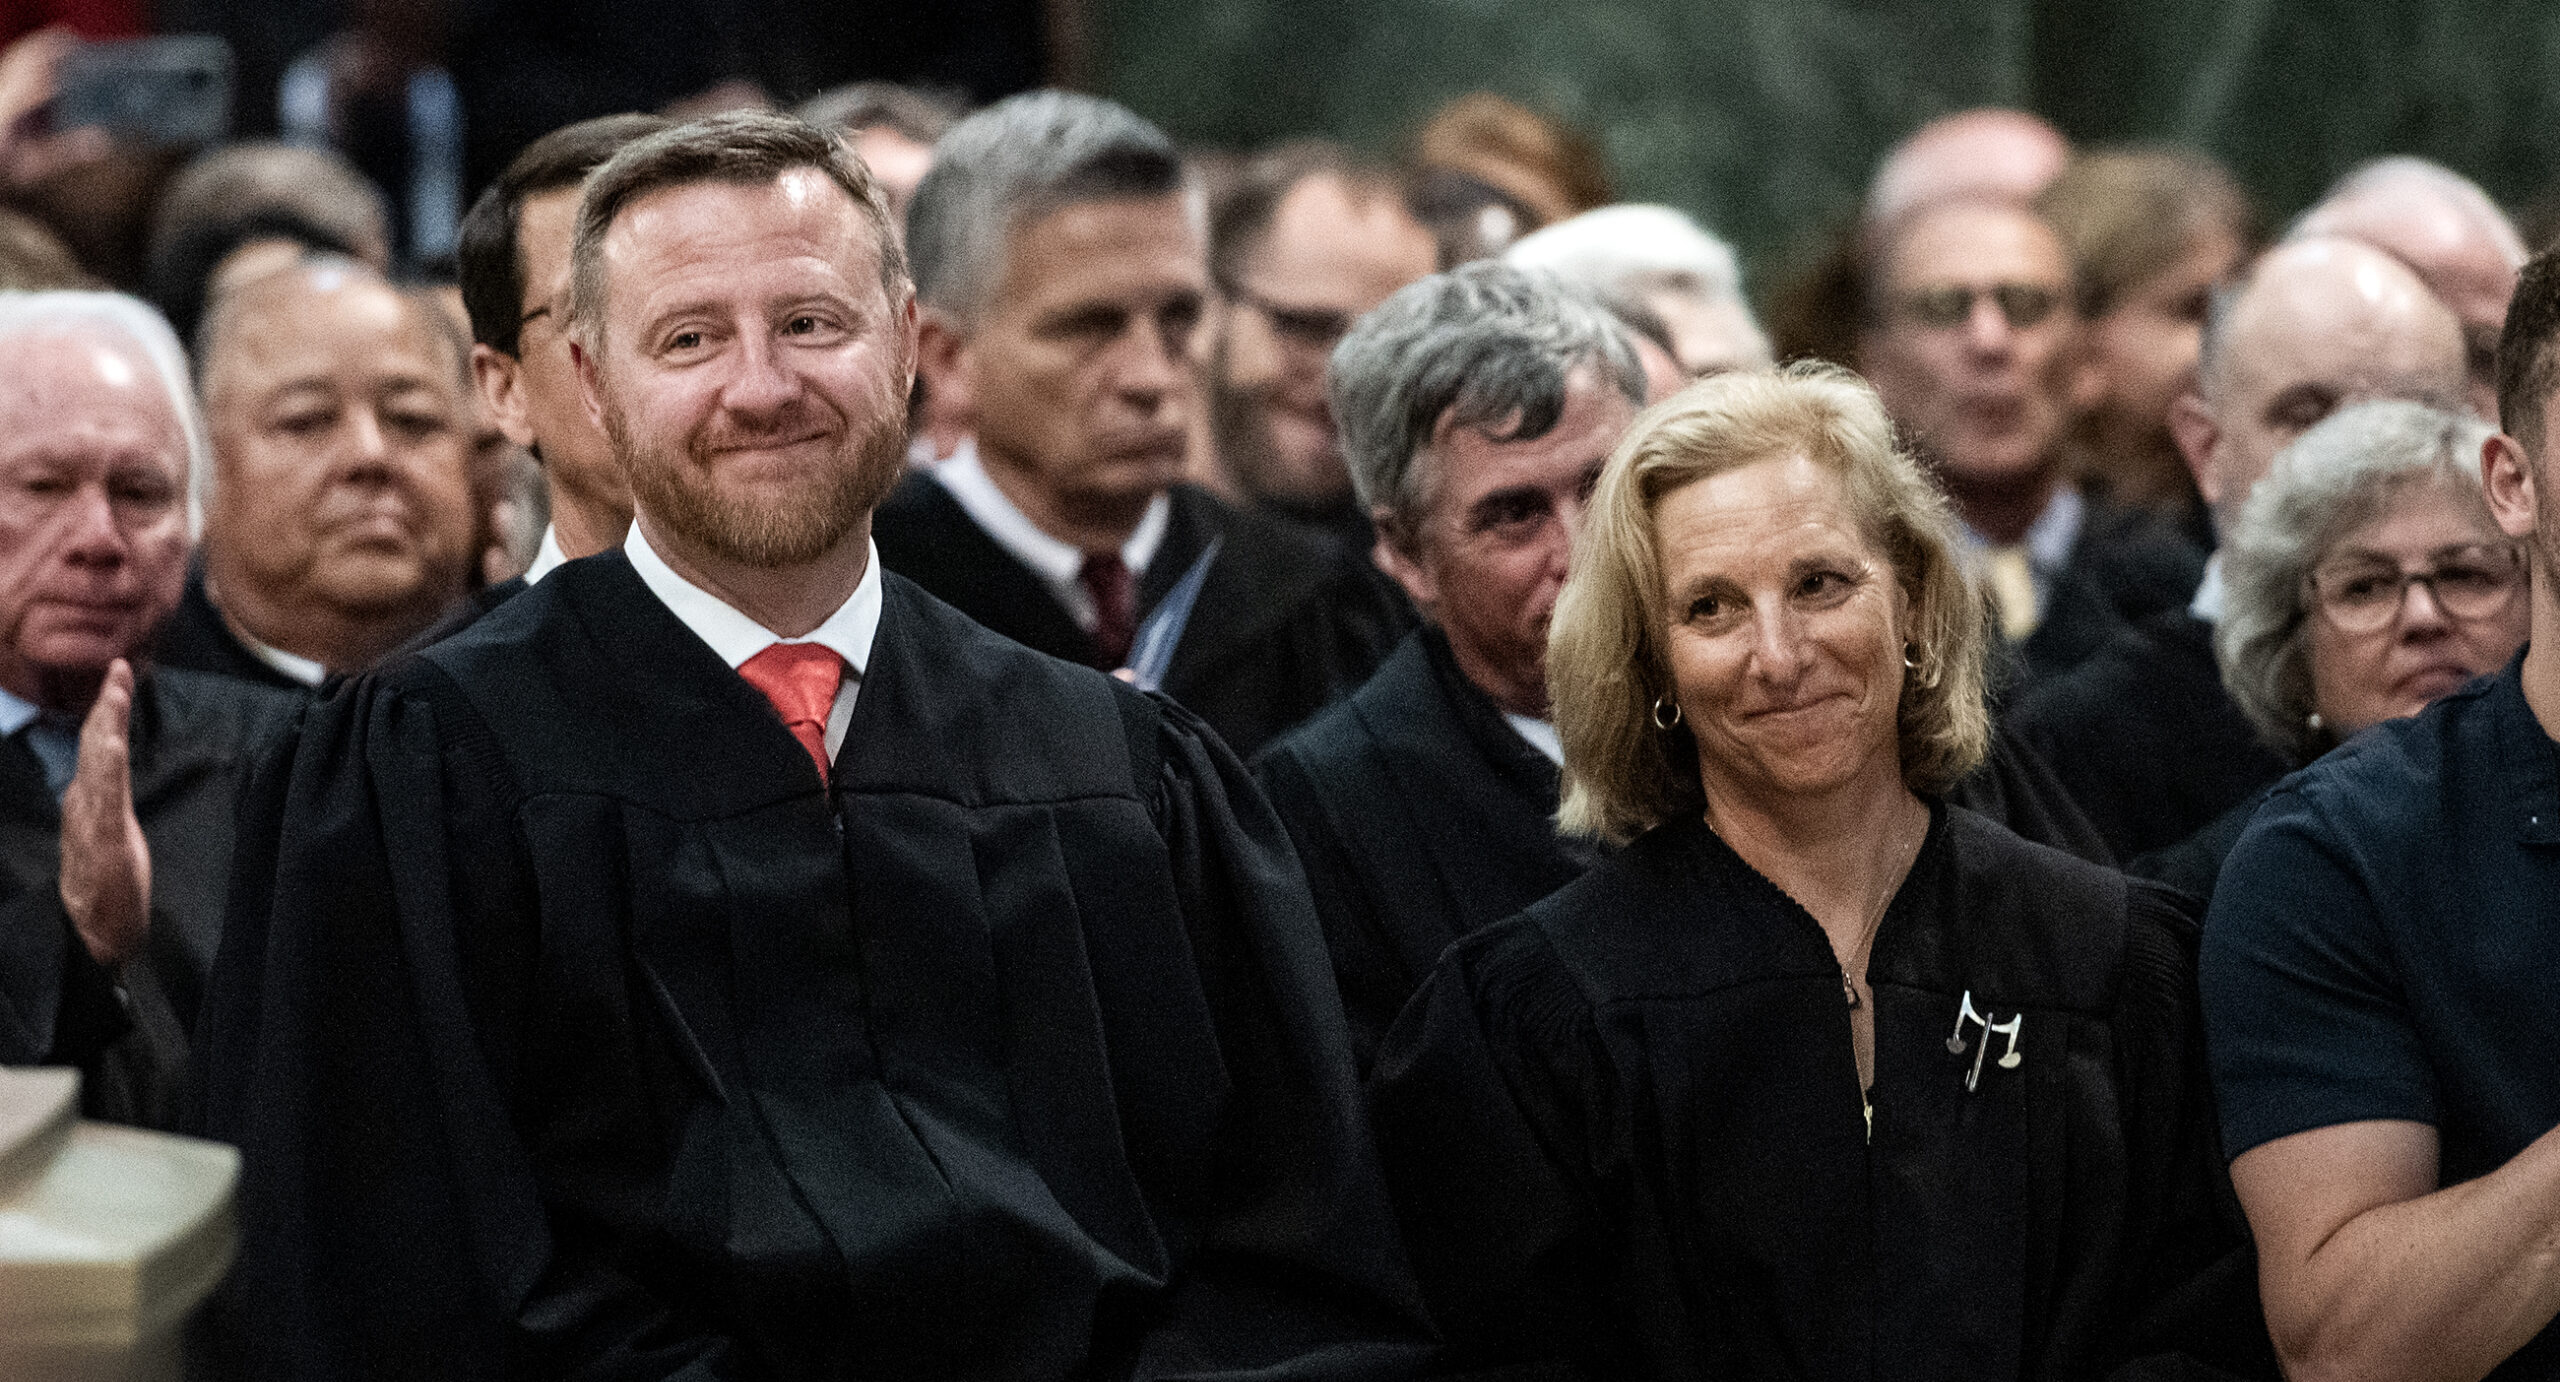 Two justices smile as they sit together in a crowd.